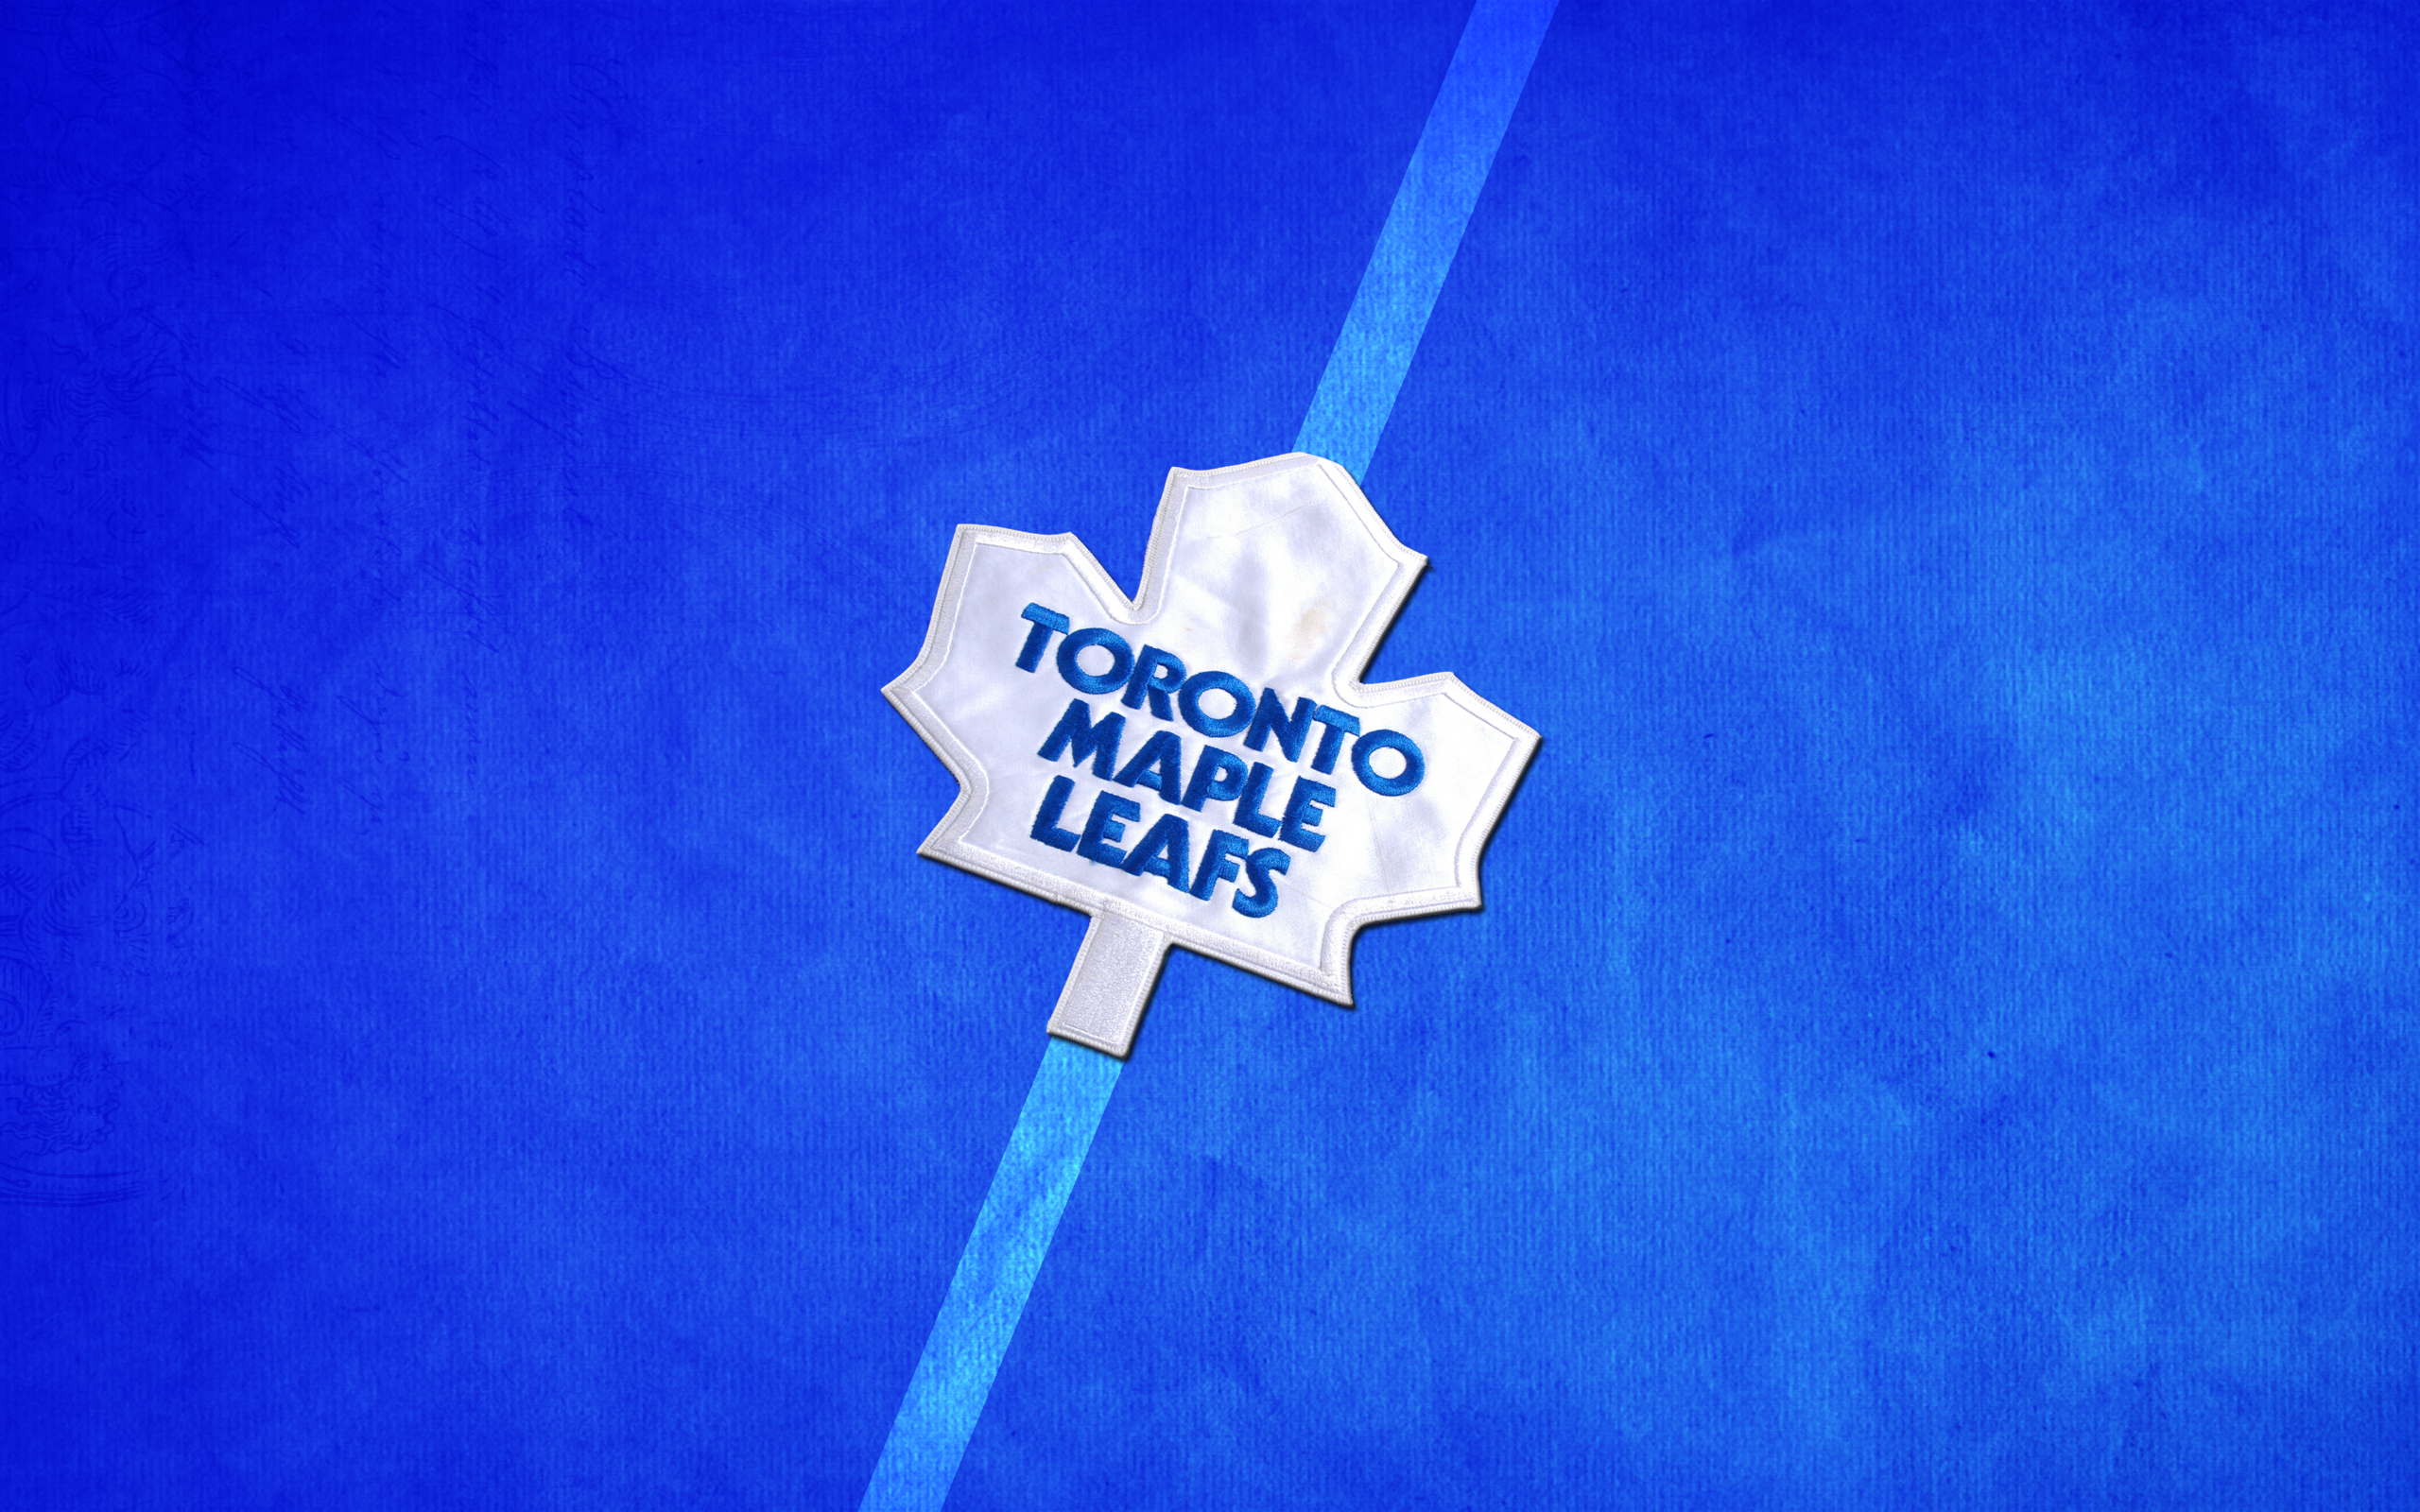 Toronto Maple Leafs Image Crazy Gallery